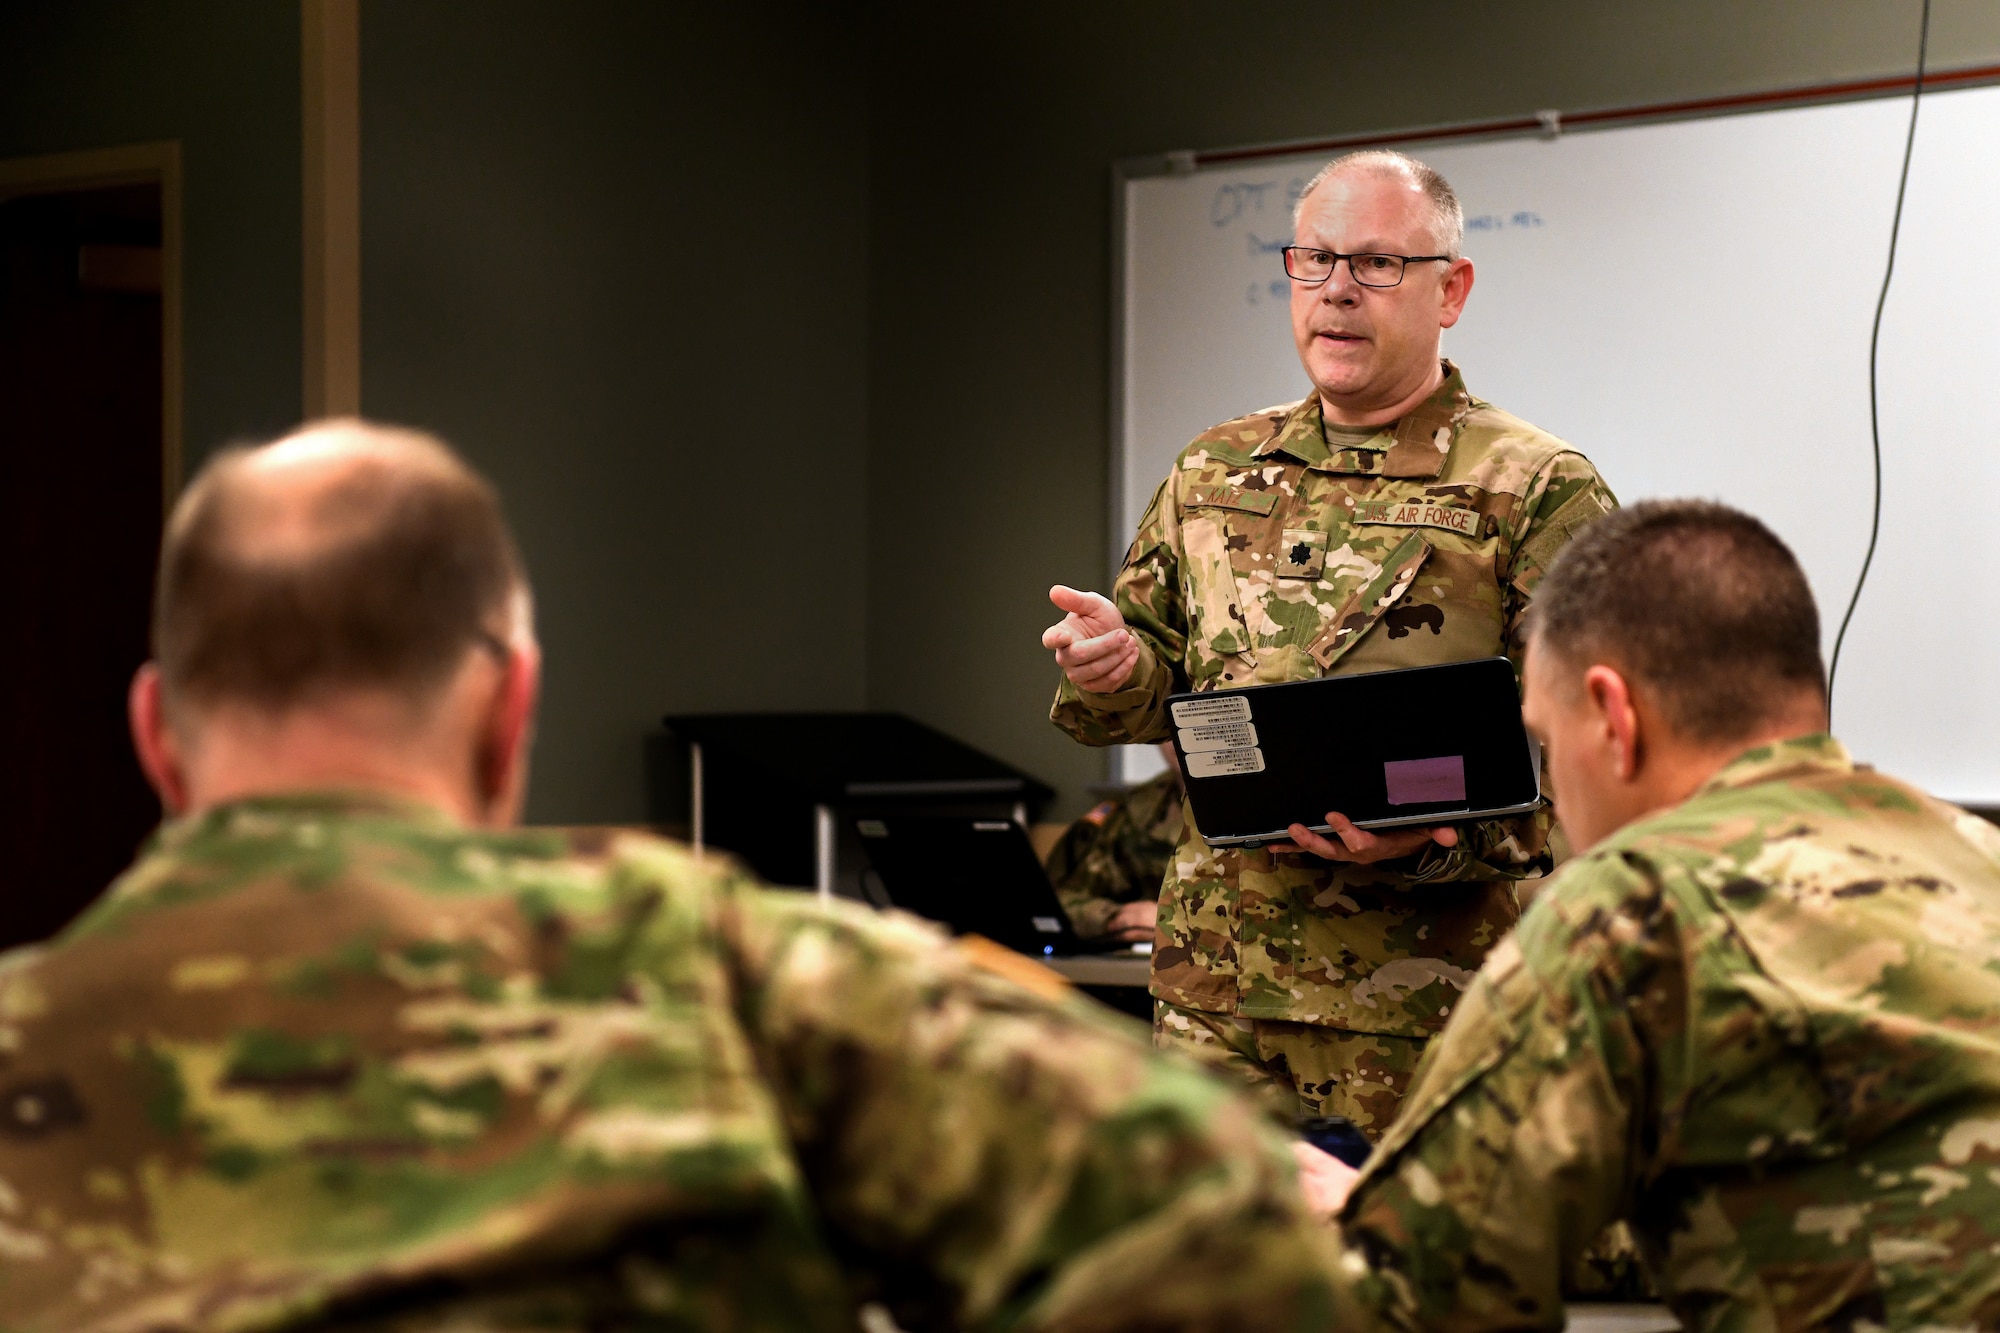 U.S. Air Force Lt. Col. (Dr.) Gary Katz, a flight surgeon assigned to the 178th Wing who was called to State Active Duty and is currently serving on Joint Task Force-37 for Operation Steady Resolve, briefs commanders March 23, 2020 at the Defense Supply Center in Columbus, Ohio. Katz is one of more than 400 members of the Ohio National Guard called to support food distribution efforts at 12 locations across Ohio, serving more than 11 million Ohioans in all 88 counties. (U.S. Air National Guard photo by Tech. Sgt. Shane Hughes)